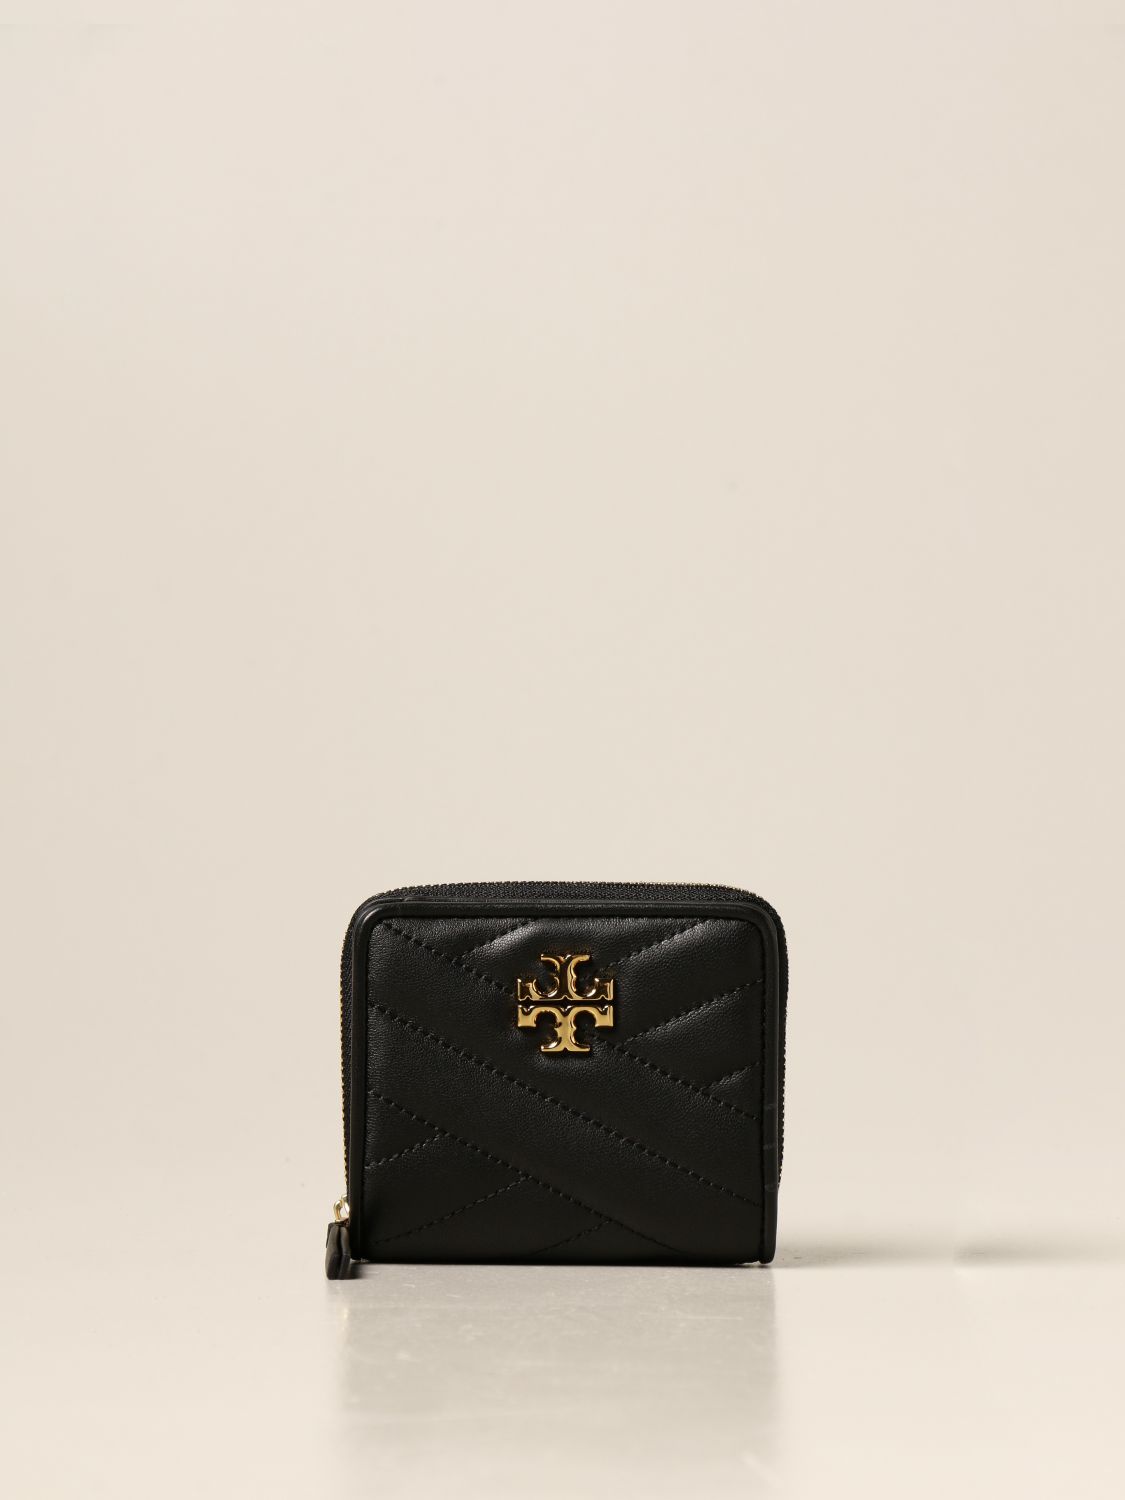 TORY BURCH: Kira wallet in quilted nappa leather with metallic emblem -  Black | Tory Burch mini bag 56820 online on 